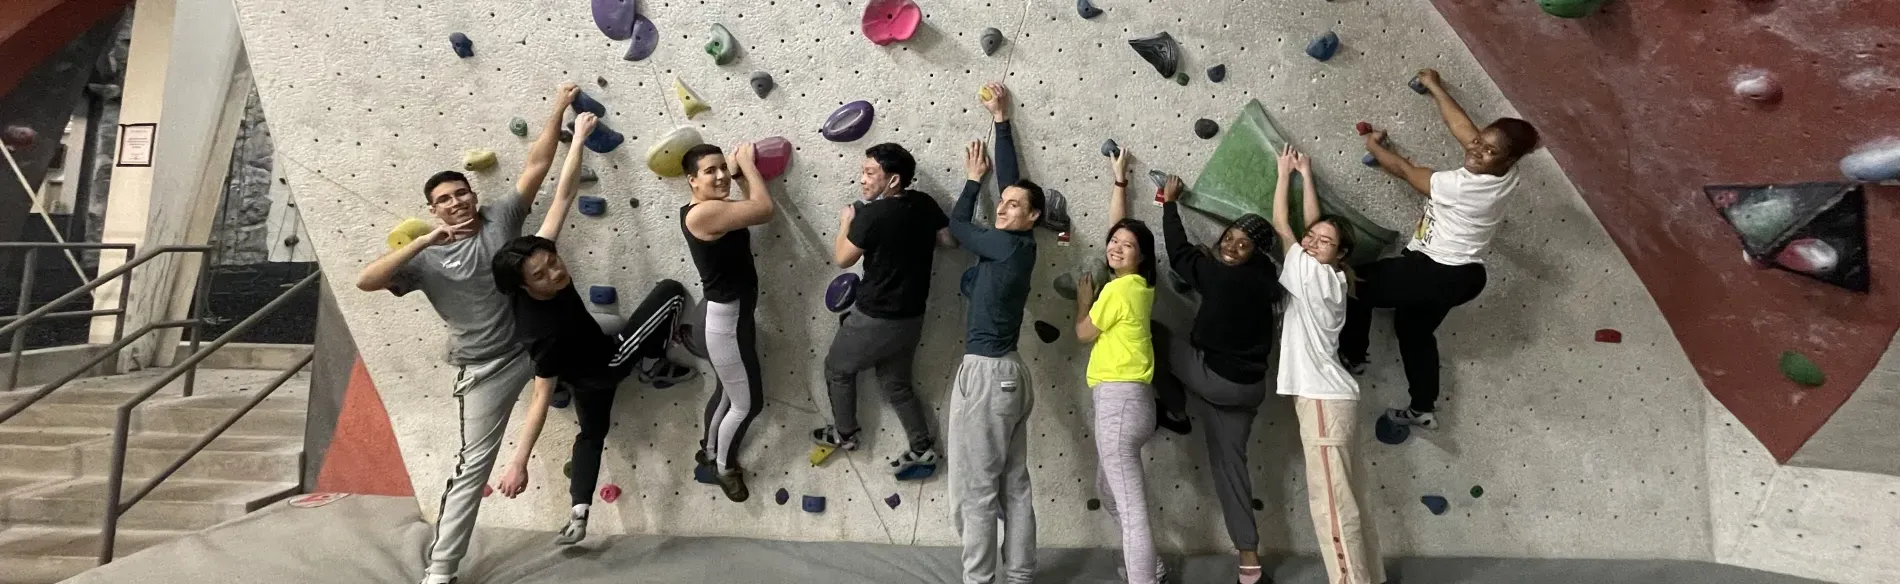 group photo in front of rock climbing wall